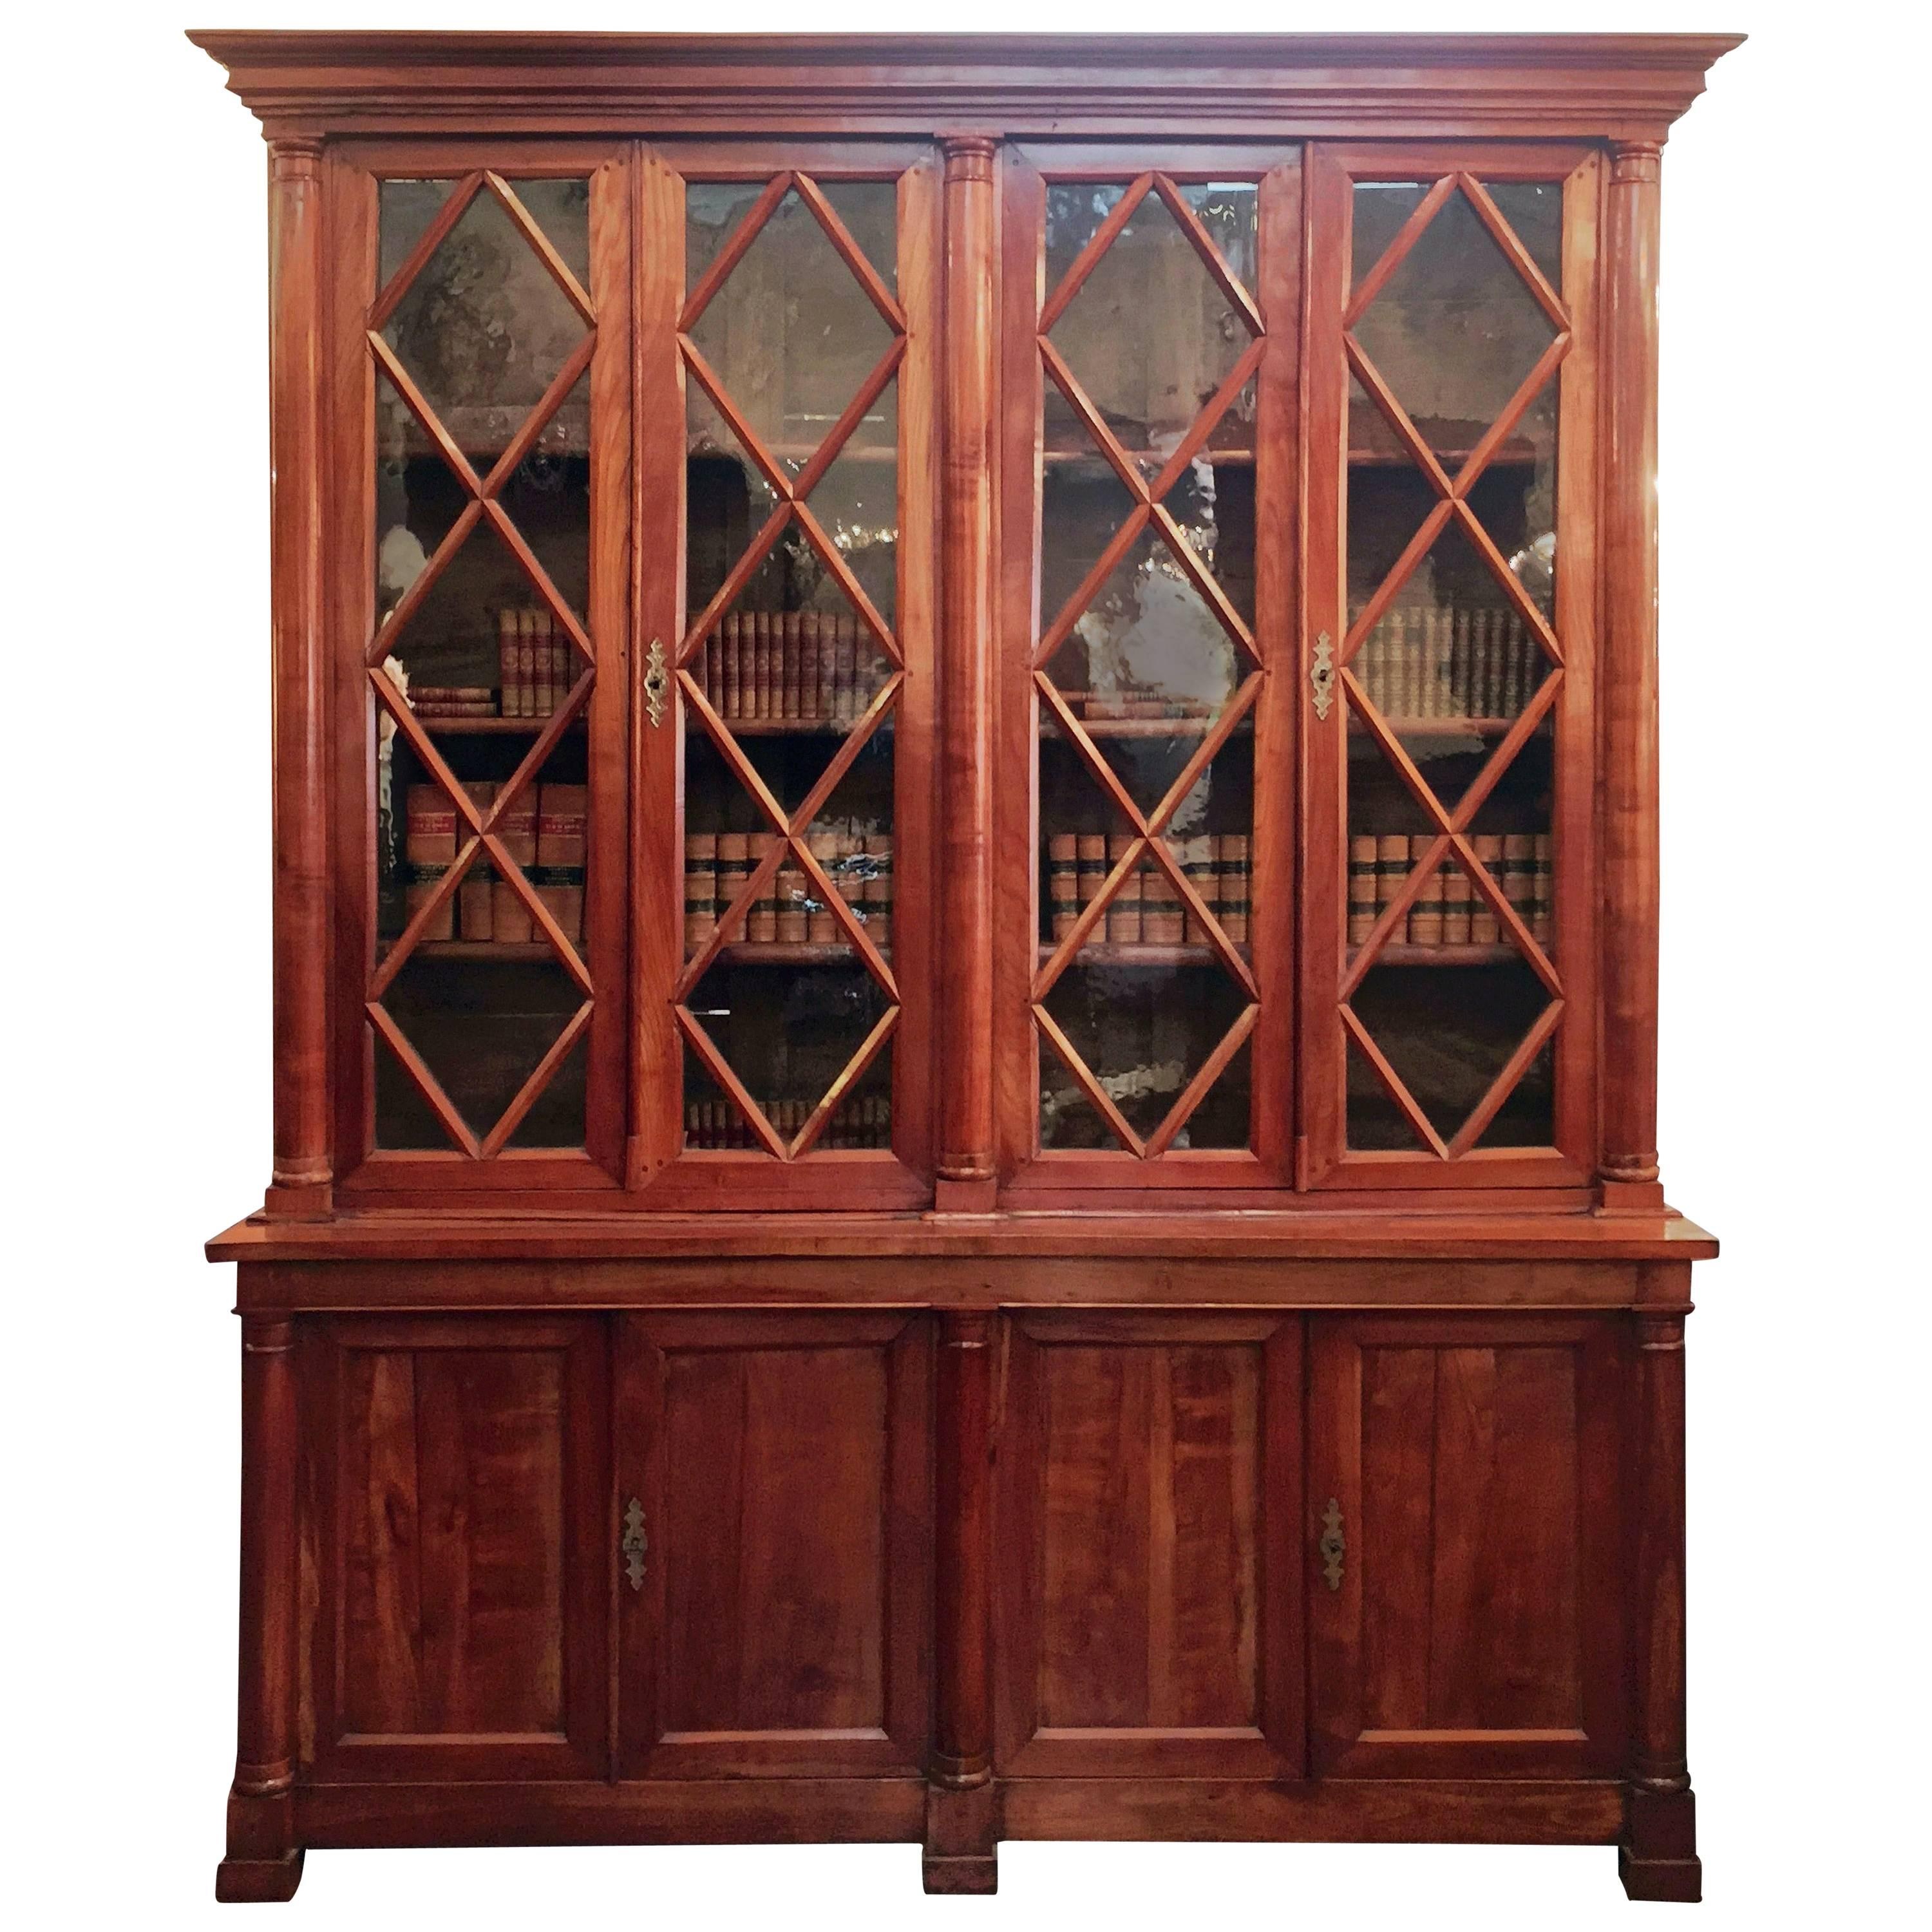 Large French Glazed Front Bibliotheque or Bookcase of Cherry